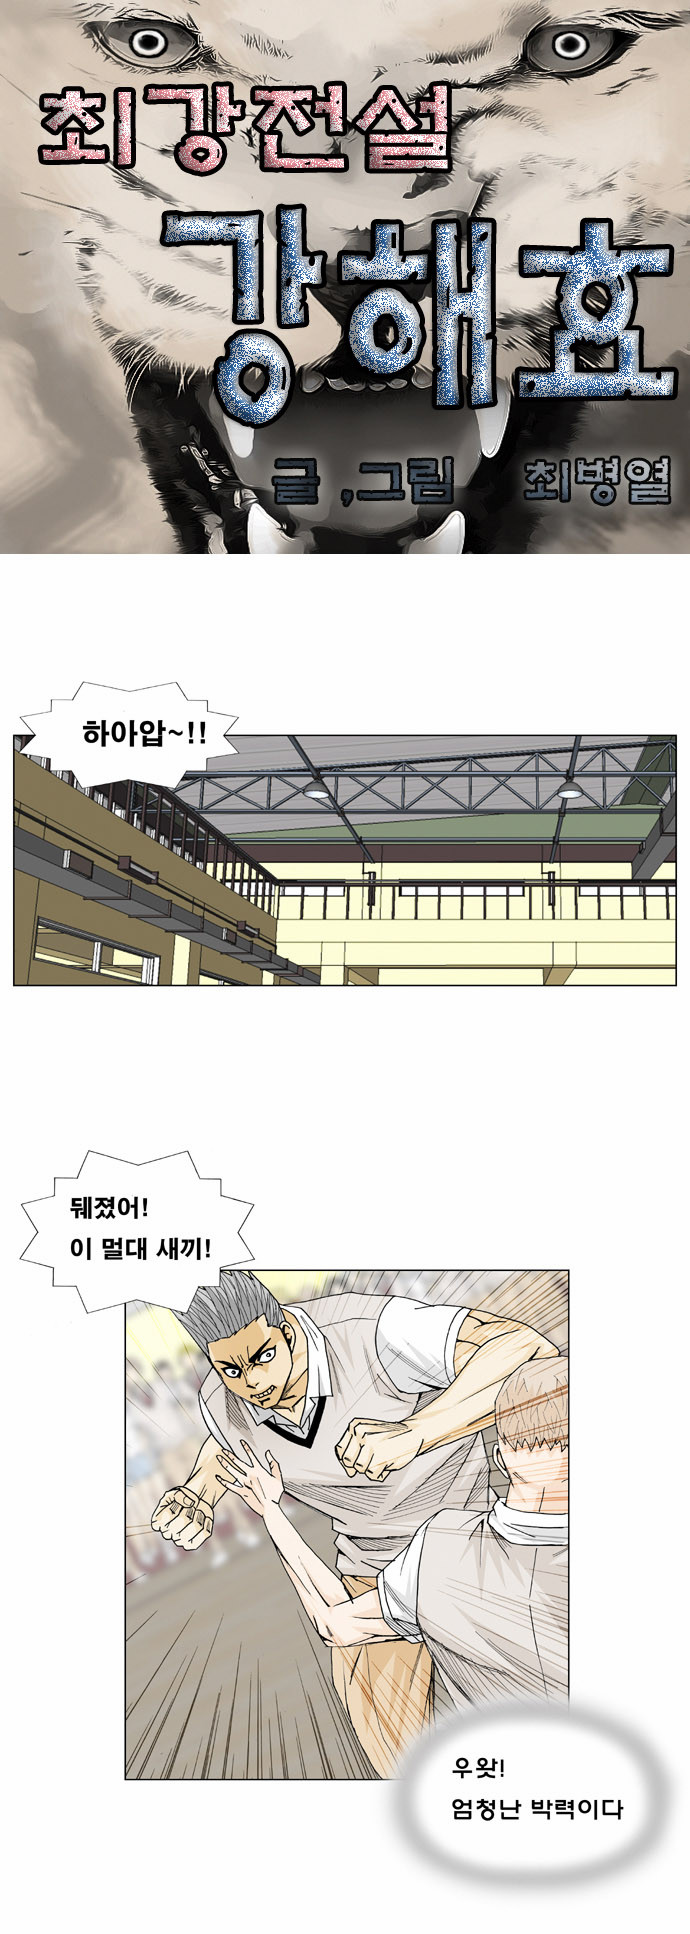 Ultimate Legend - Kang Hae Hyo - Chapter 11 - Page 2